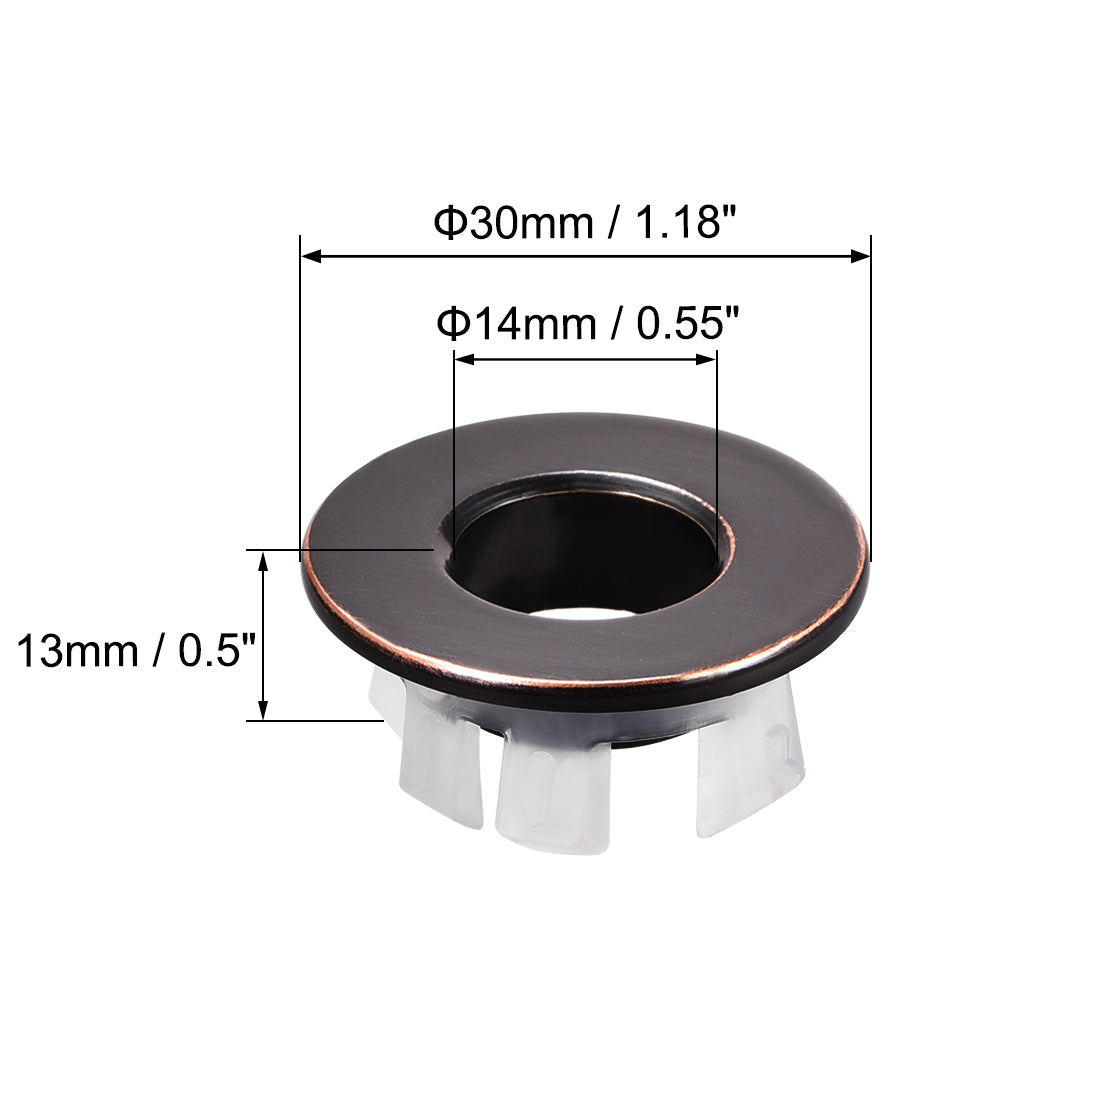 uxcell Uxcell Sink Overflow Covers Kitchen Basin Trim Round Hole Caps Insert Spares Oil Rubbed Bronze 3 Pcs